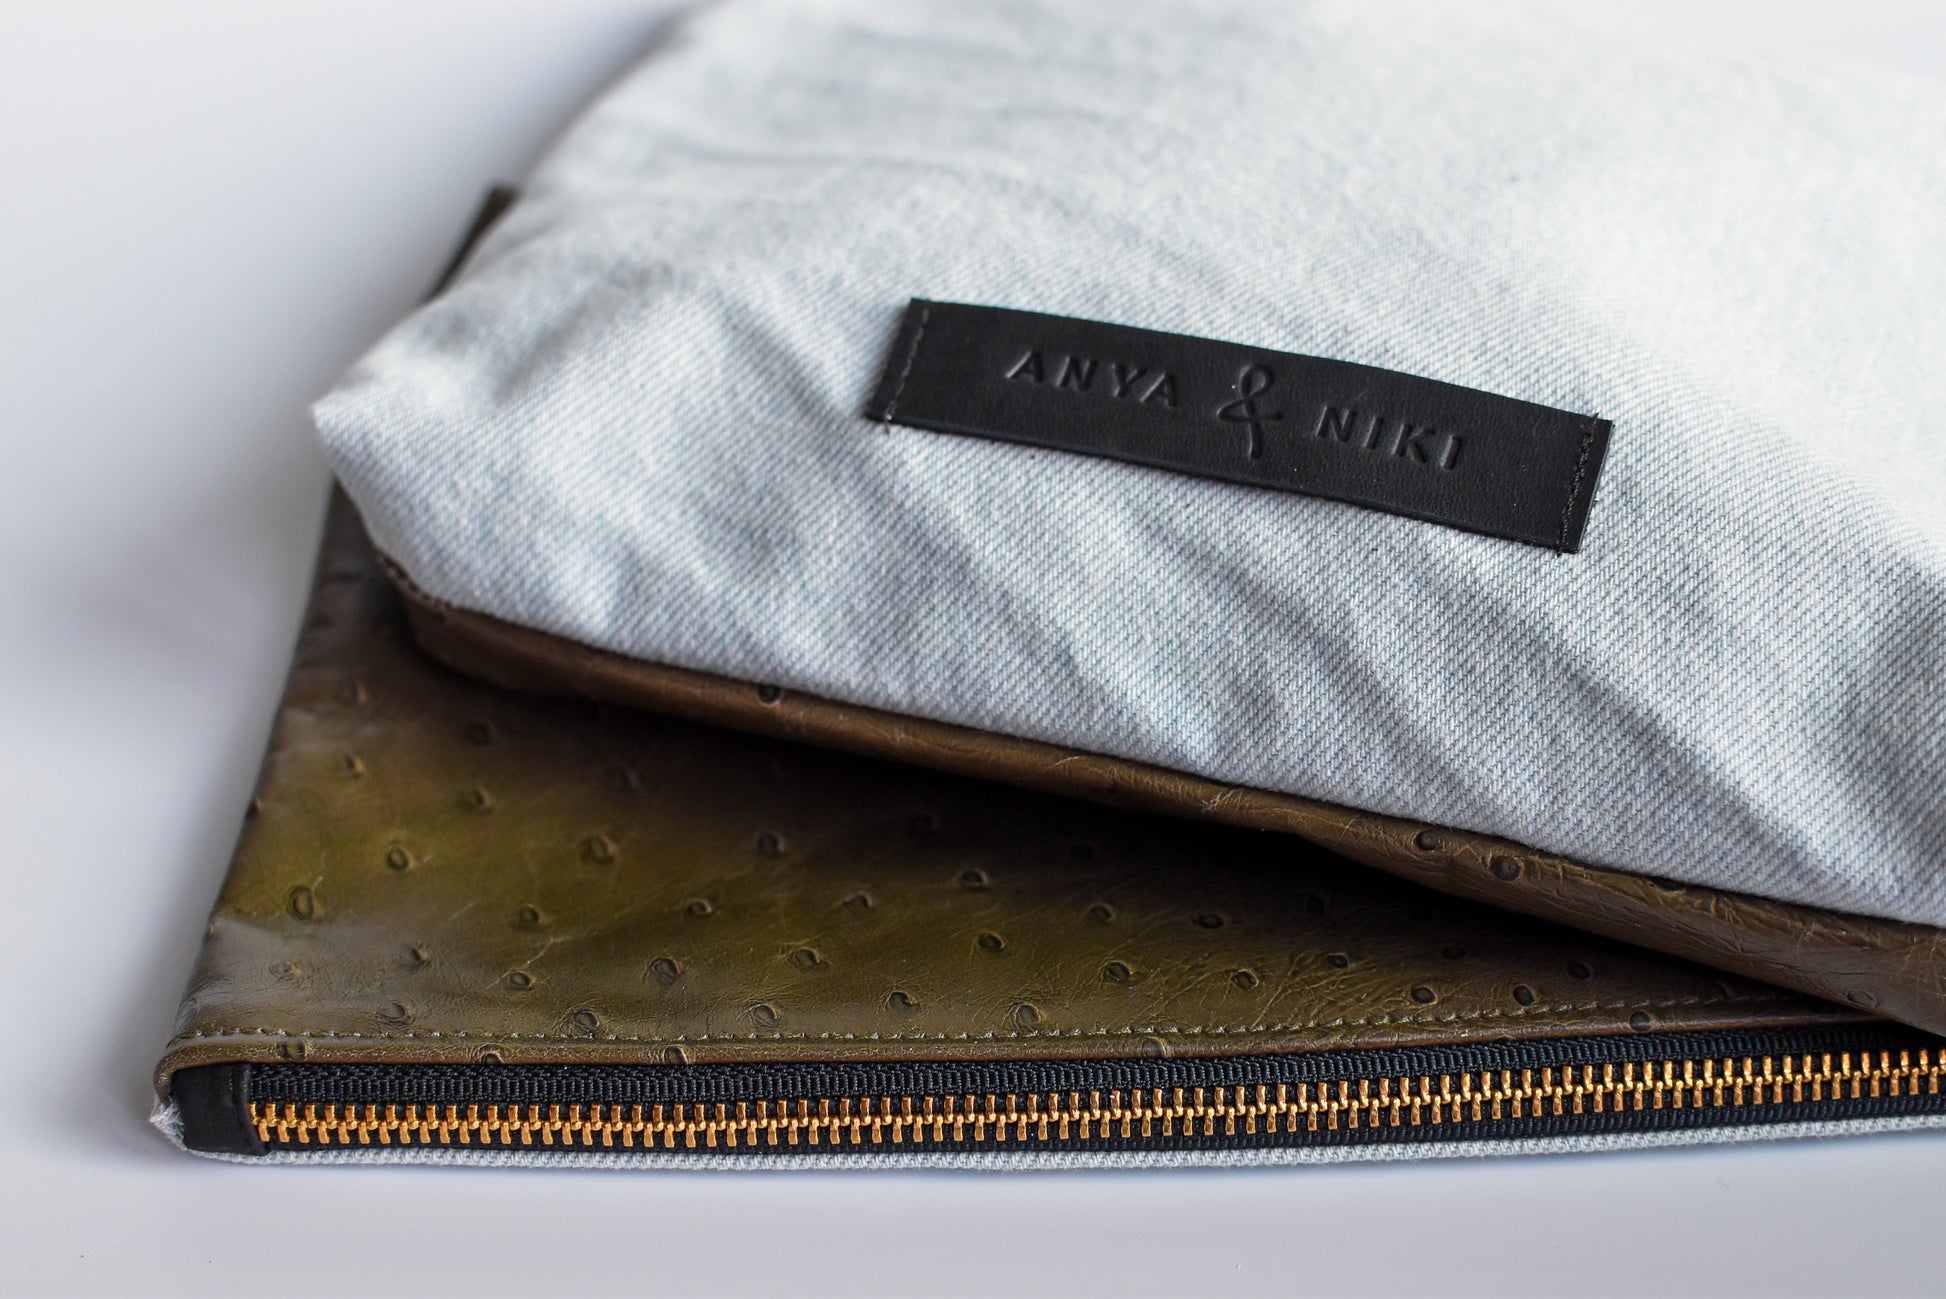 Bleached denim and fern colored embossed leather skin medium pouch with brass zipper and leather logo label.